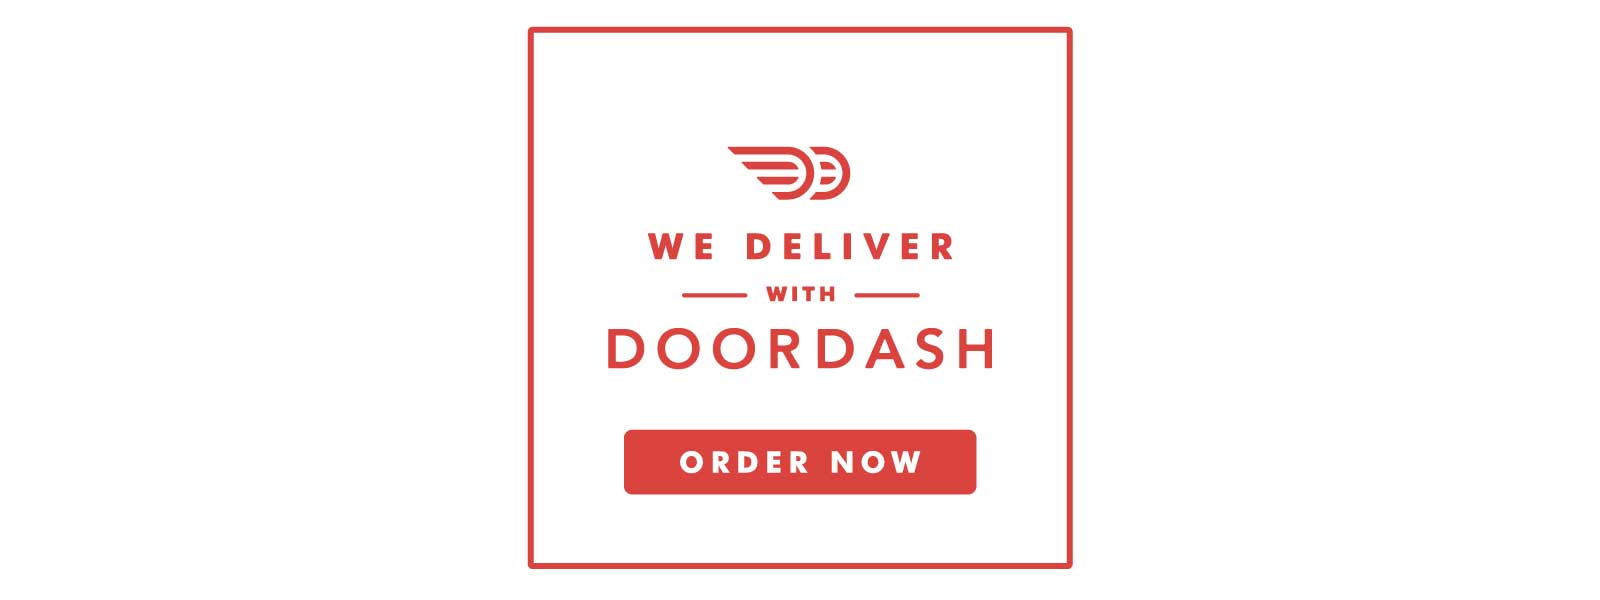 We deliver with DoorDash!  Click here to go to our DoorDash storefront.